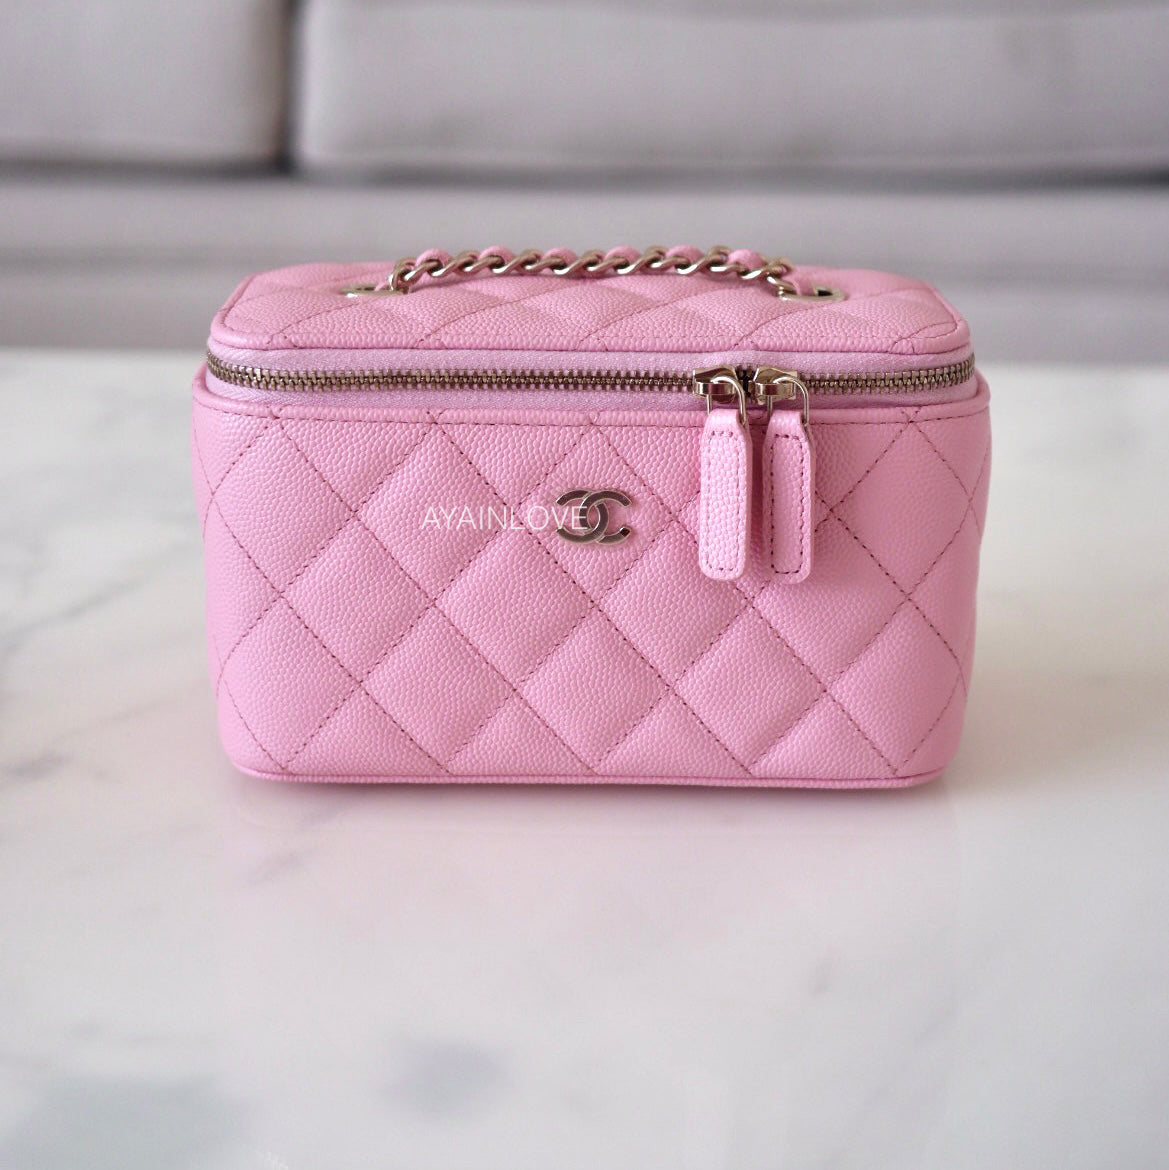 Chanel Pink Quilted Caviar Micro Vanity Case Pale Gold Hardware, 2022 (Like New), Womens Handbag